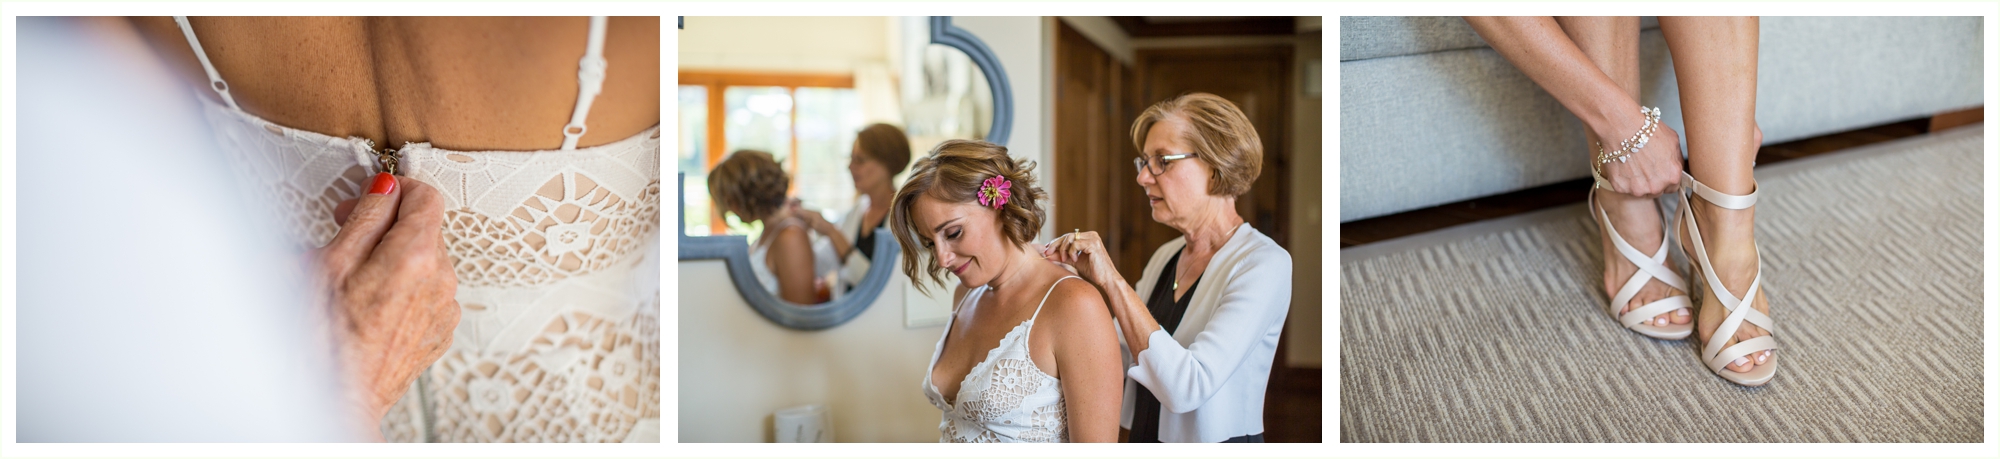 bride's mother helping her into her dress at ritz carlton vail colorado